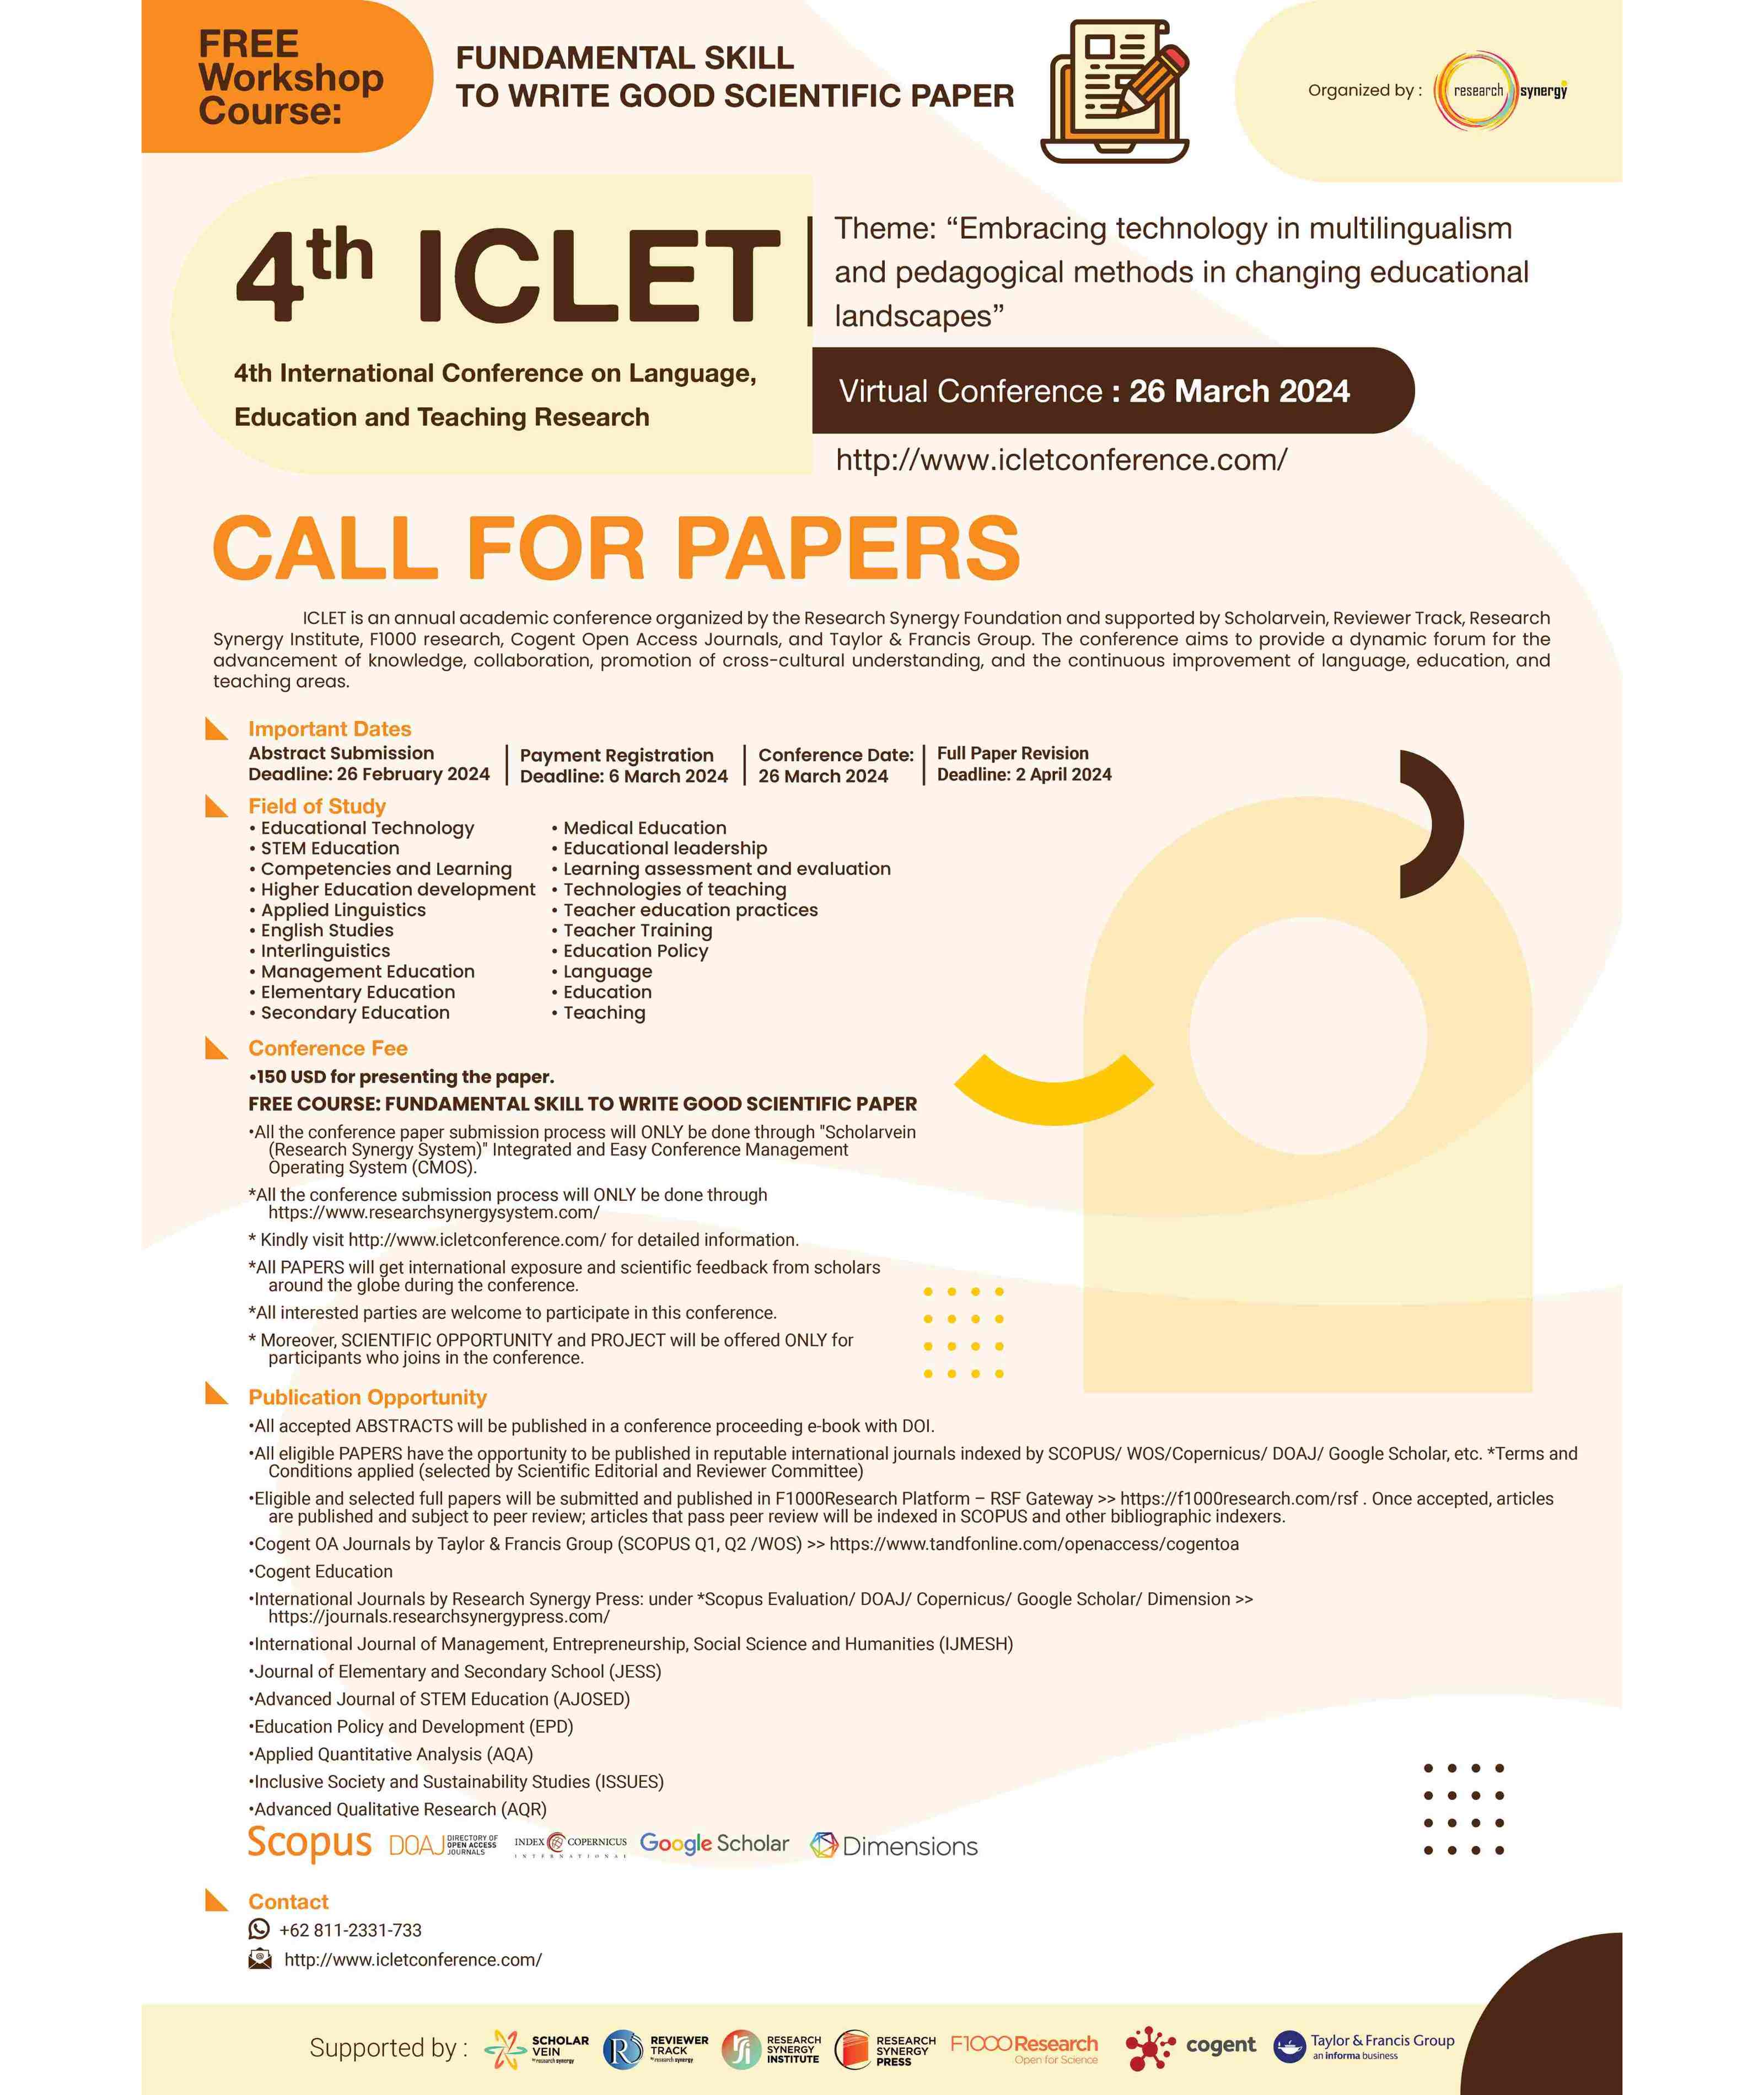 4th International Conference on Language, Education and Teaching Research (4th ICLET)